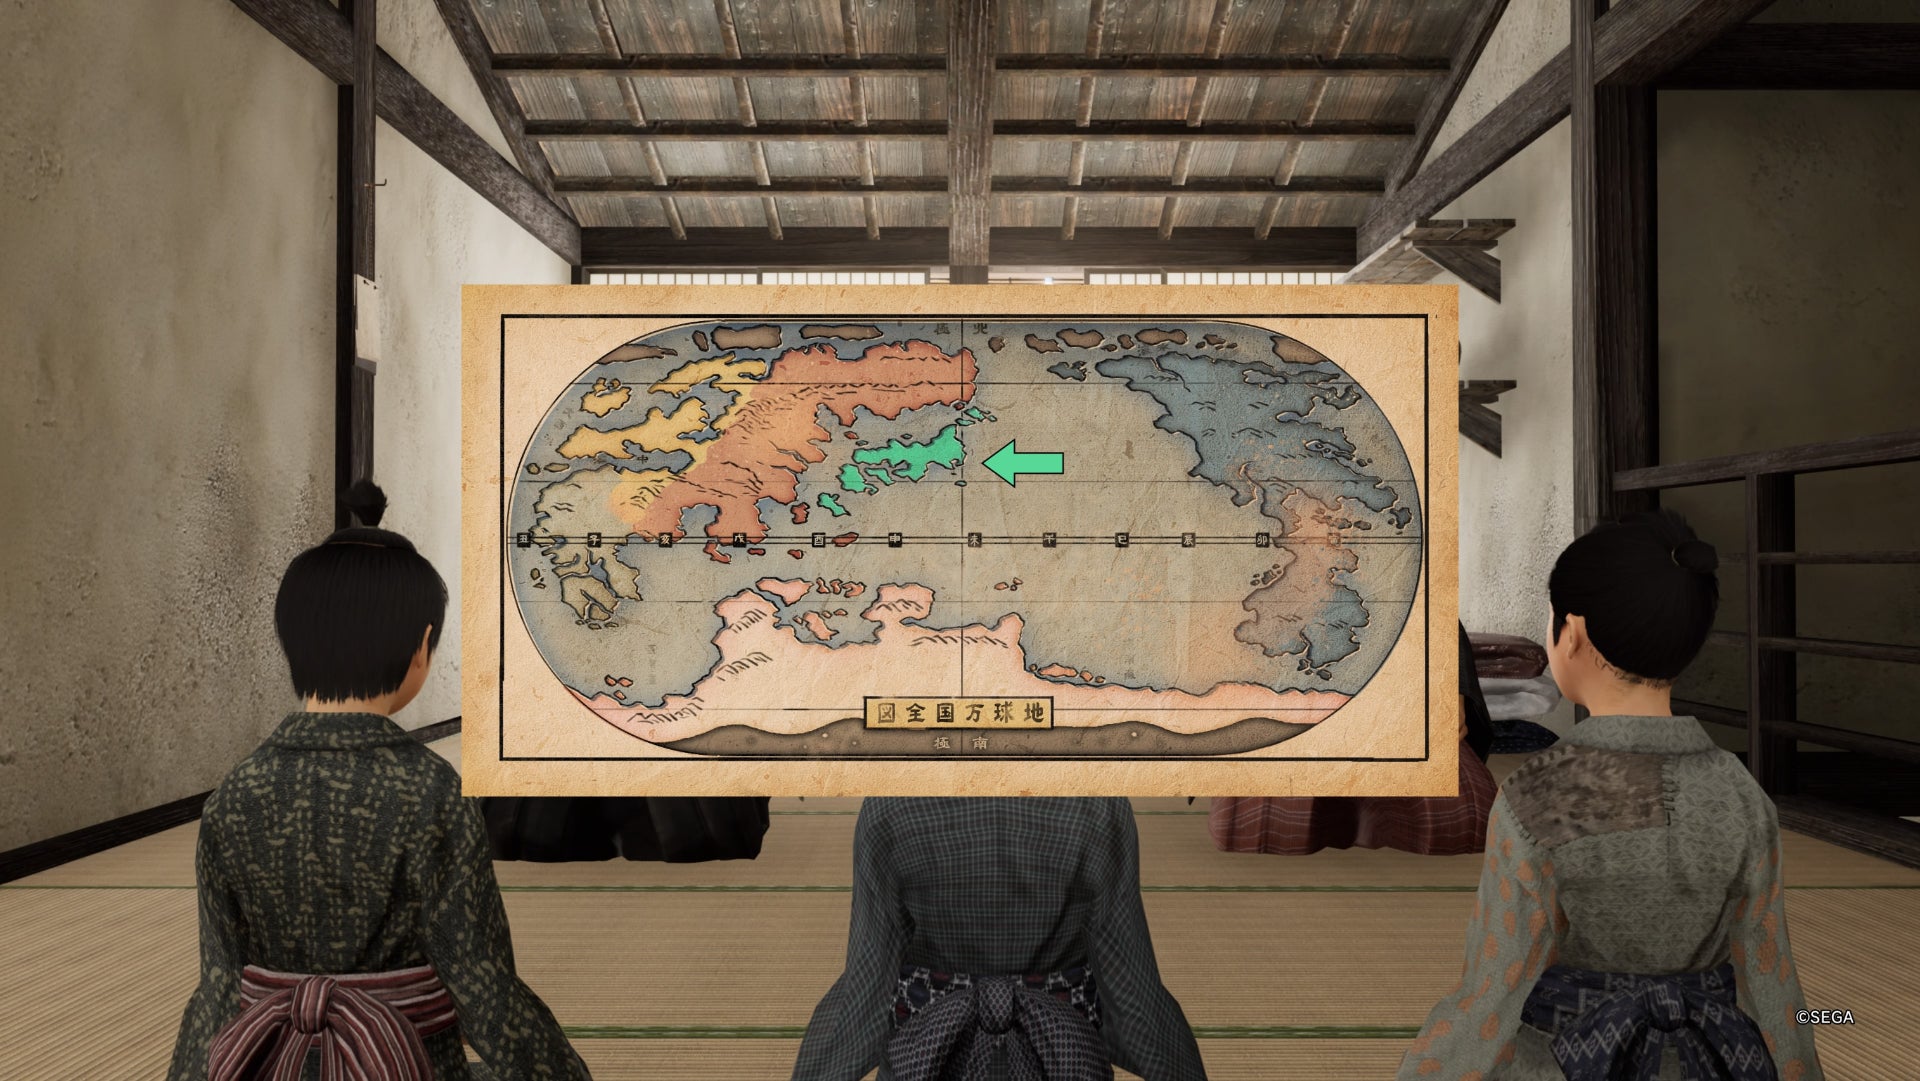 Like an Ishin dragon, the first question on the map of world fraud